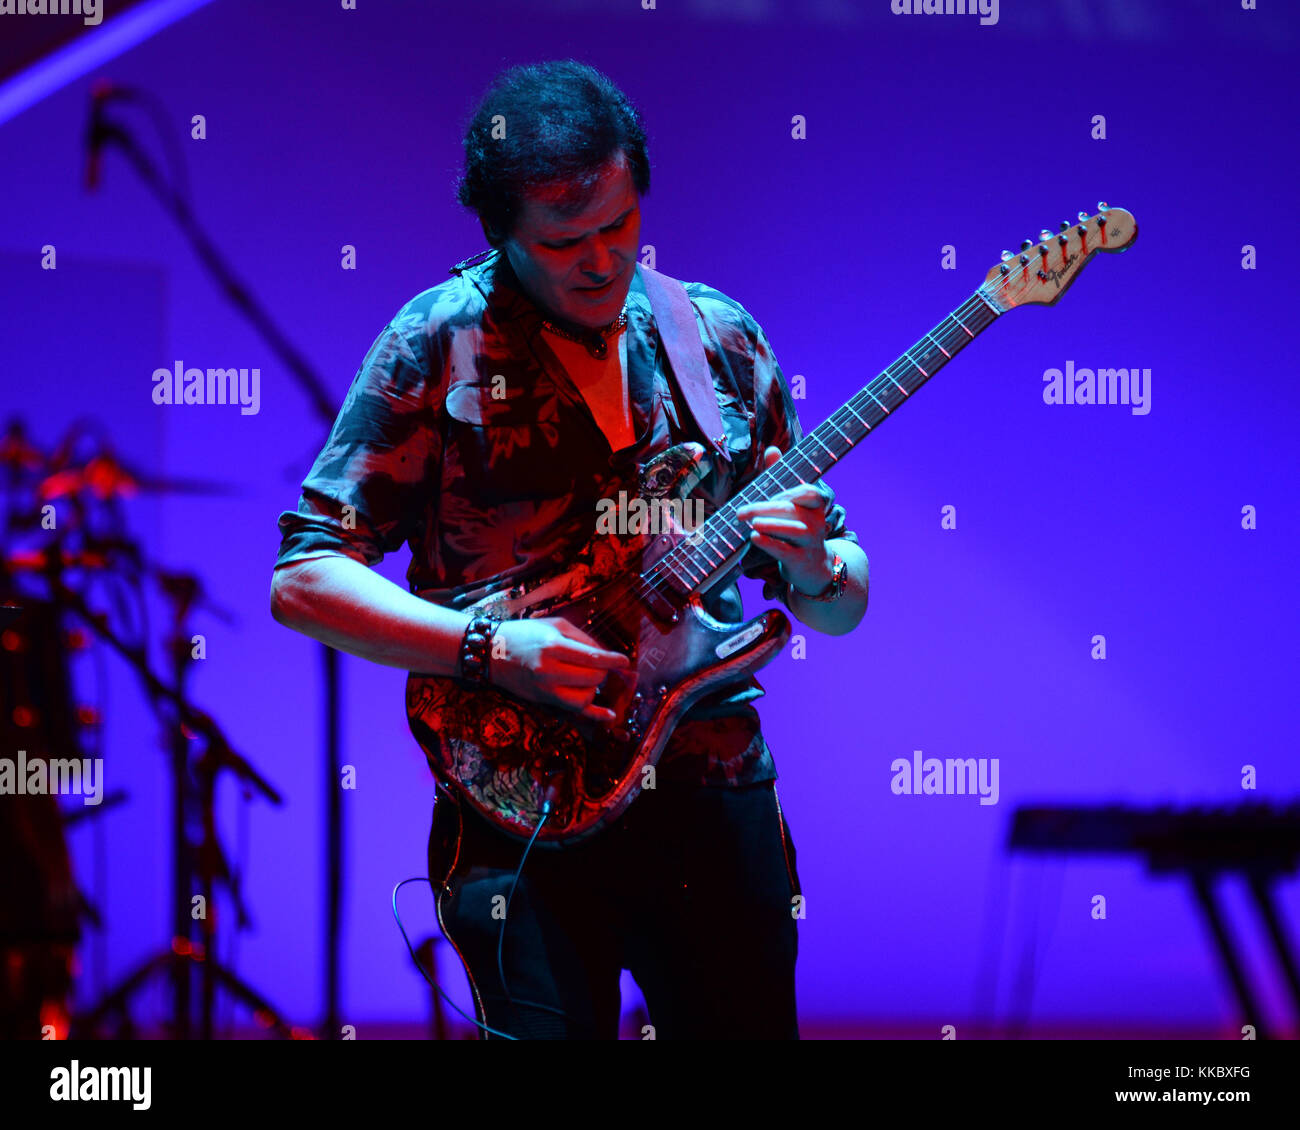 HOLLYWOOD FL - OCTOBER 12: Trevor Rabin of Anderson, Rabin and Wakeman performs at Hard Rock Live held at the Seminole Hard Rock Hotel & Casino on October 12, 2016 in Hollywood, Florida   People:  Trevor Rabin Stock Photo